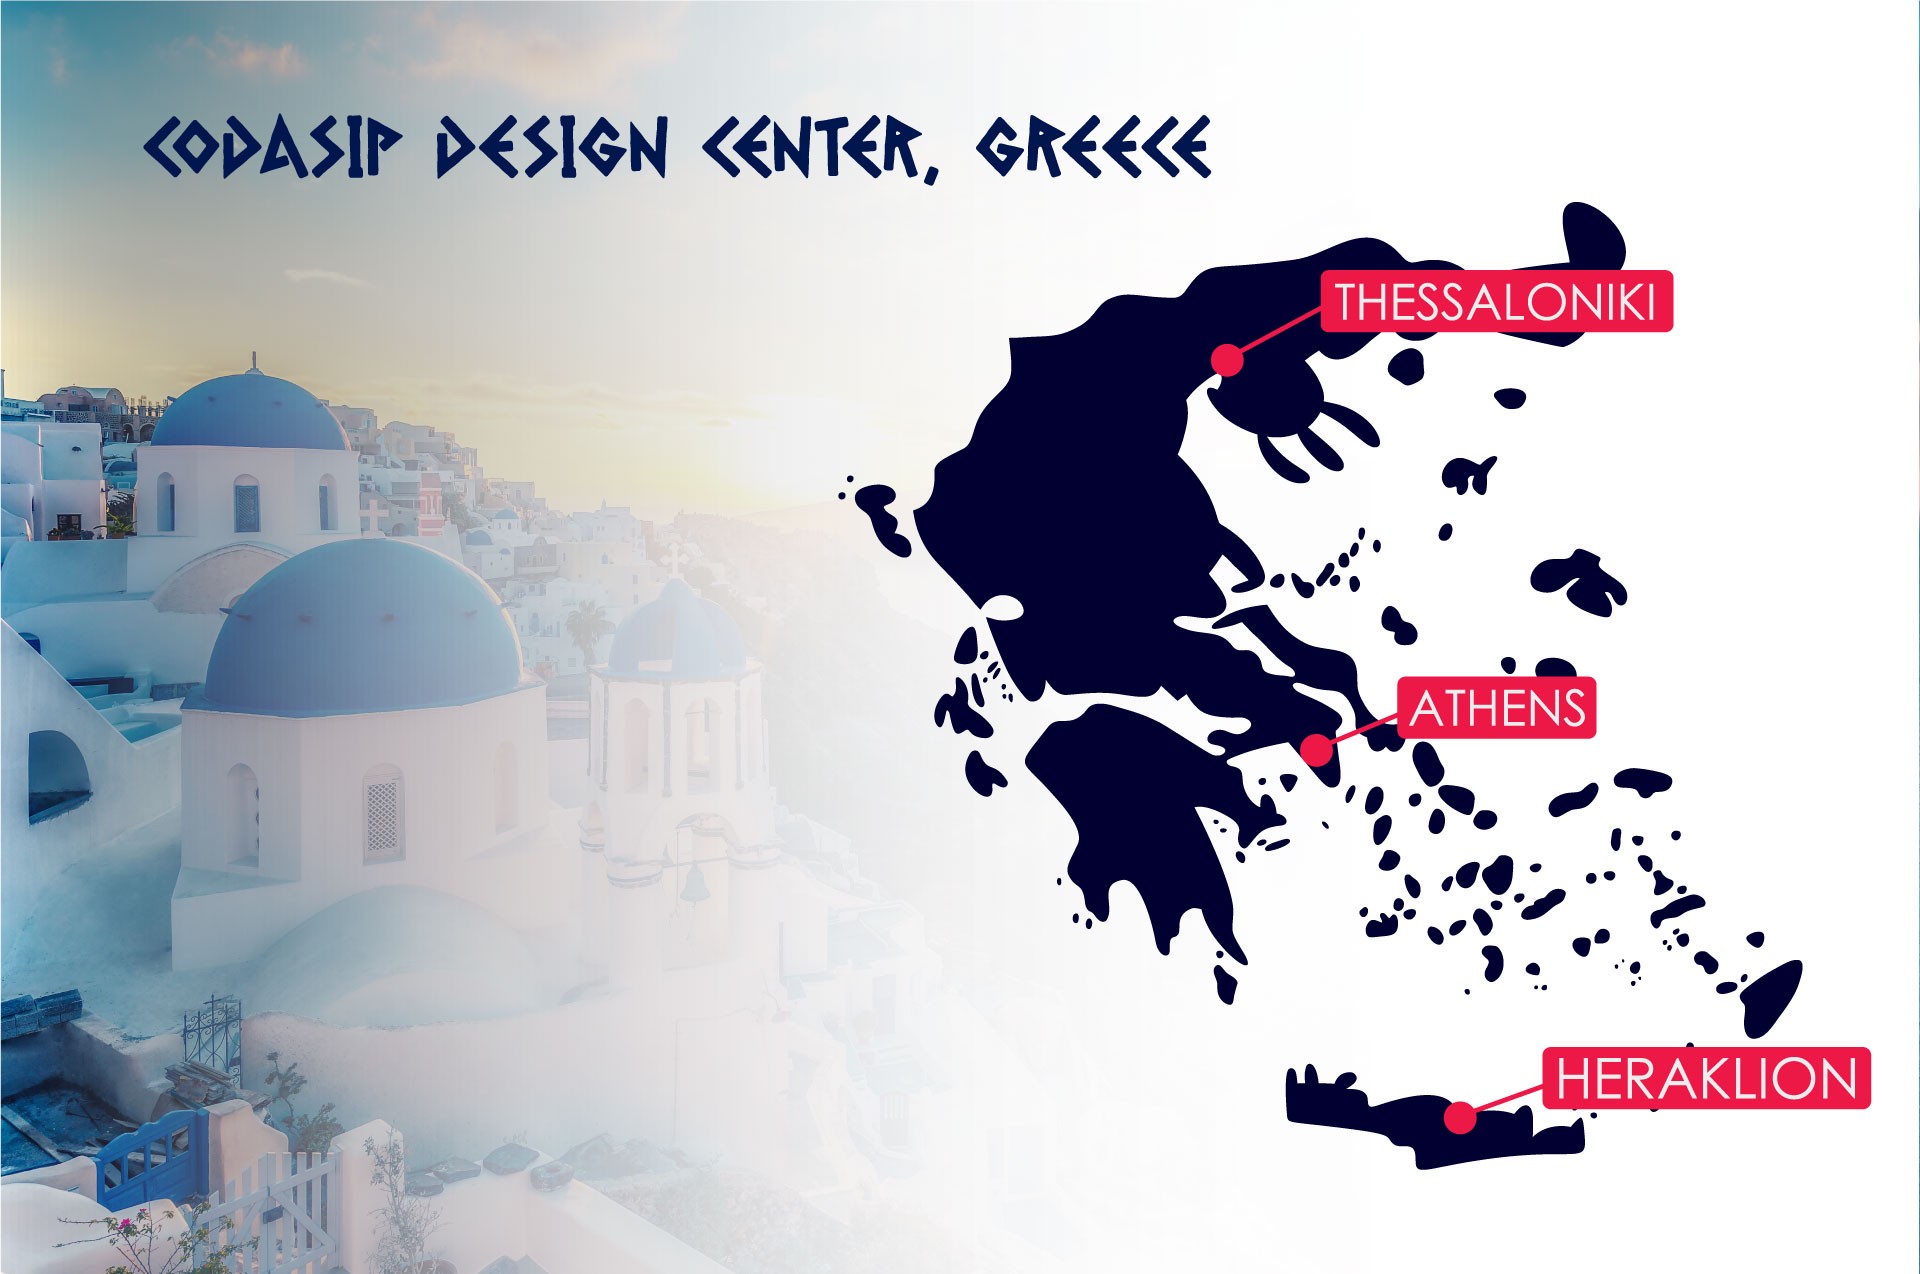 Codasip offices in Greece and Crete